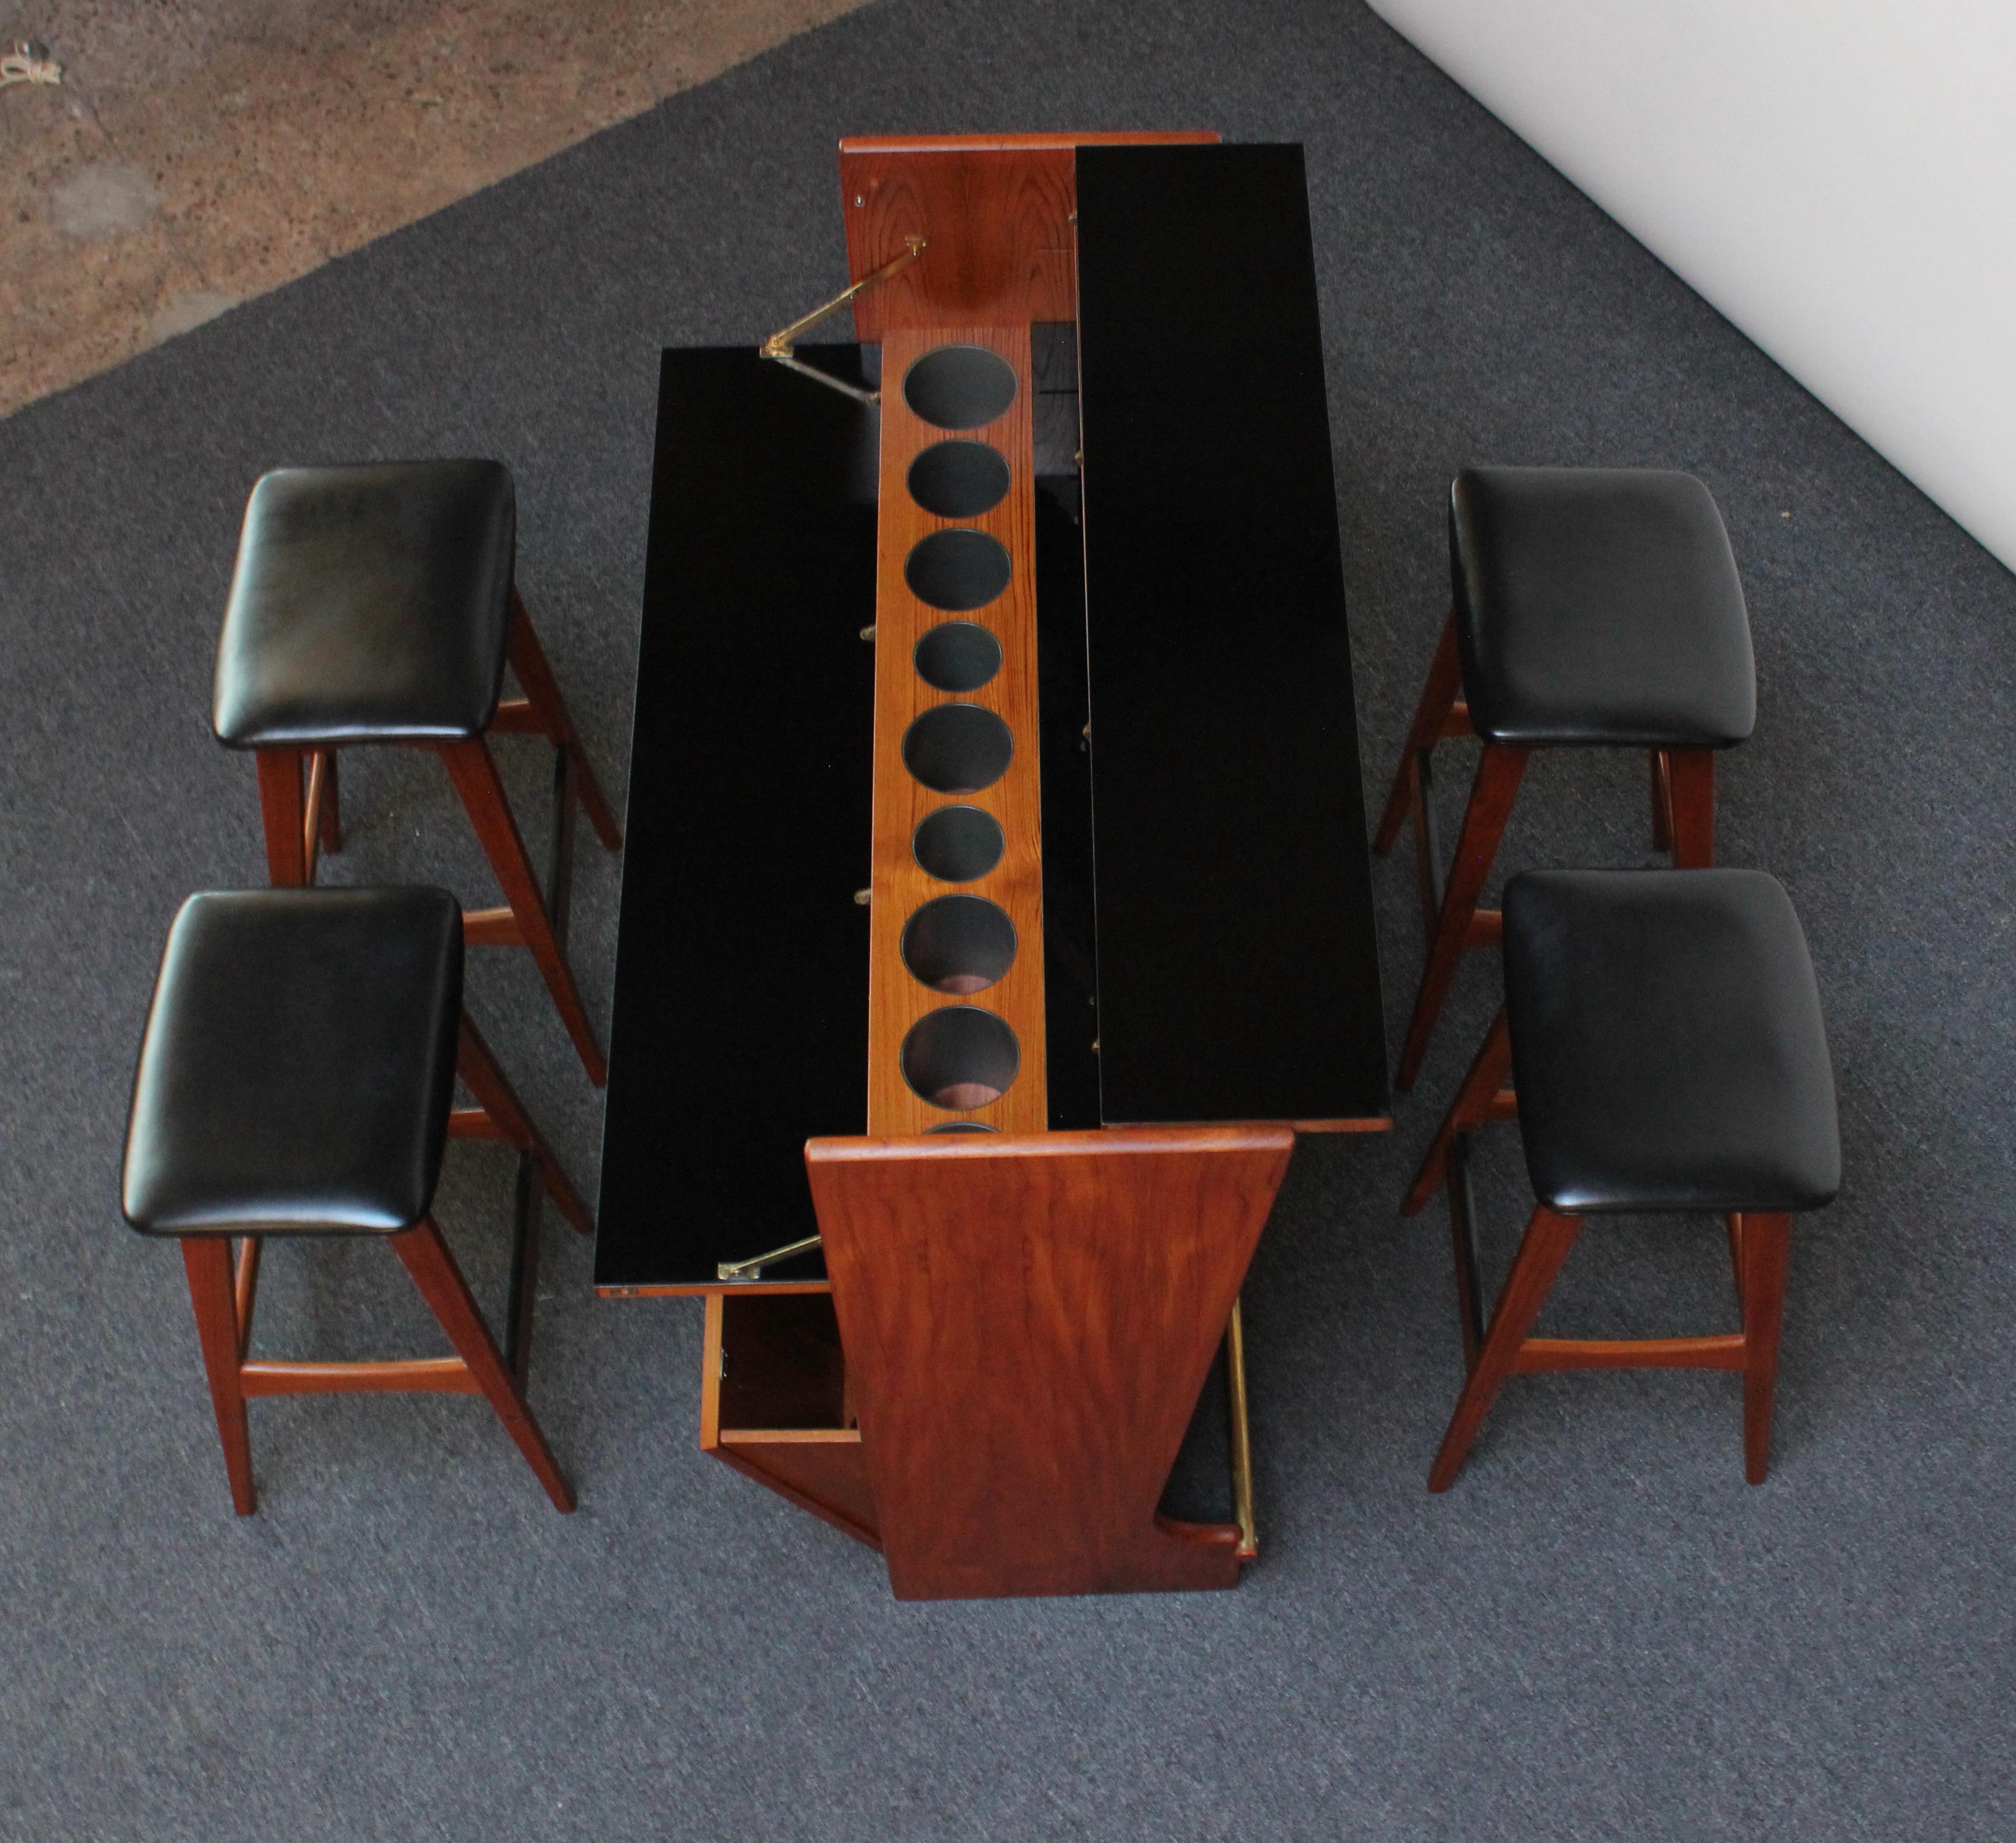 Stylish, functional Danish teak dry bar cabinet designed in the 1960s by Johannes Andersen with four corresponding stools in black leather and teak. 
One side of the bar features an inlaid circular motif and tubular brass footrest, while the other